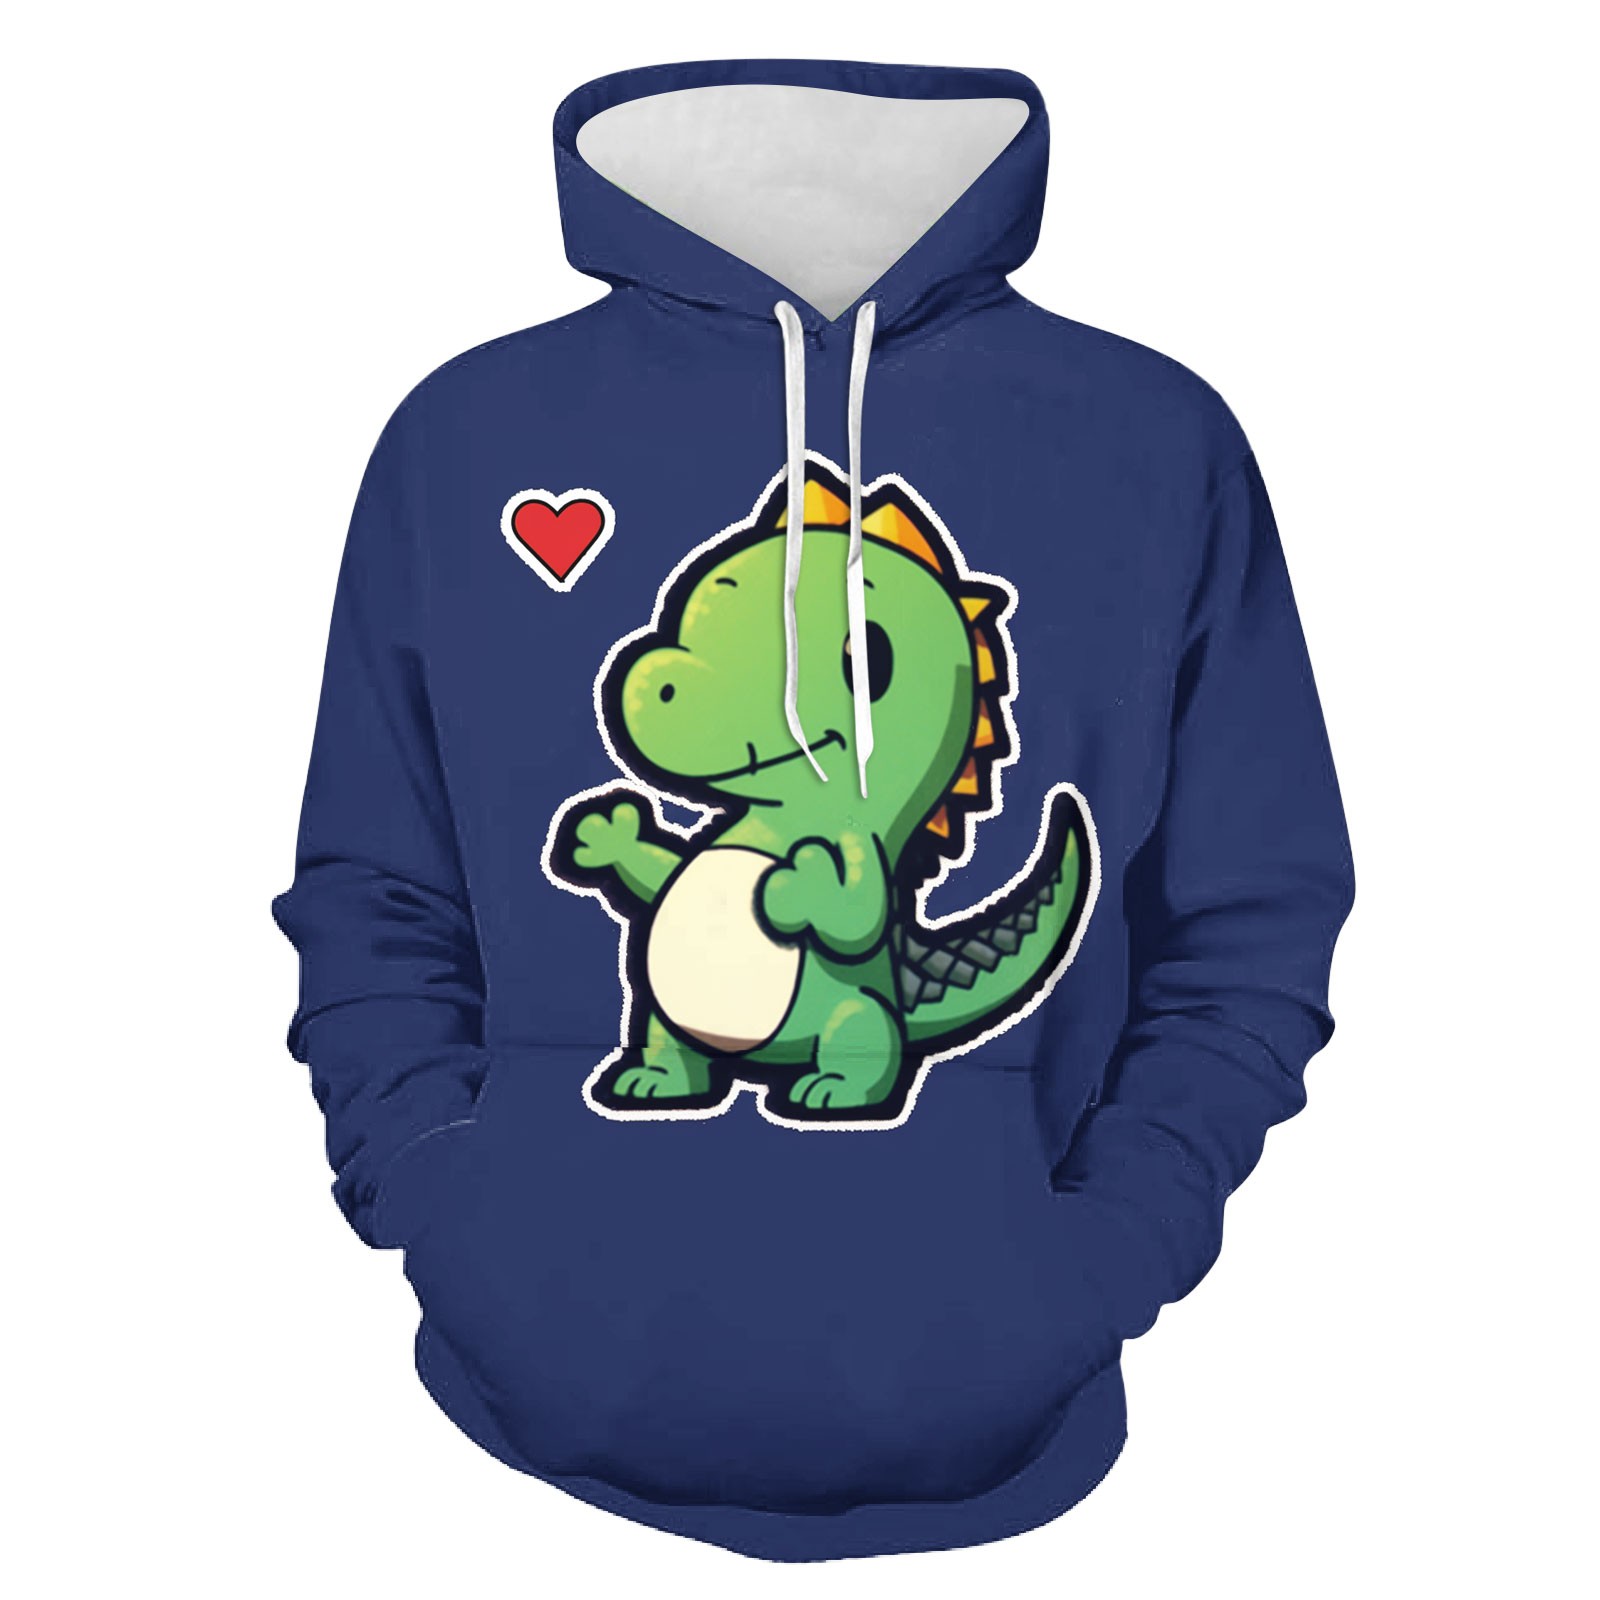 EHQJNJ Matching Couple Hoodies Mens and Same Style Couple Clothing ...